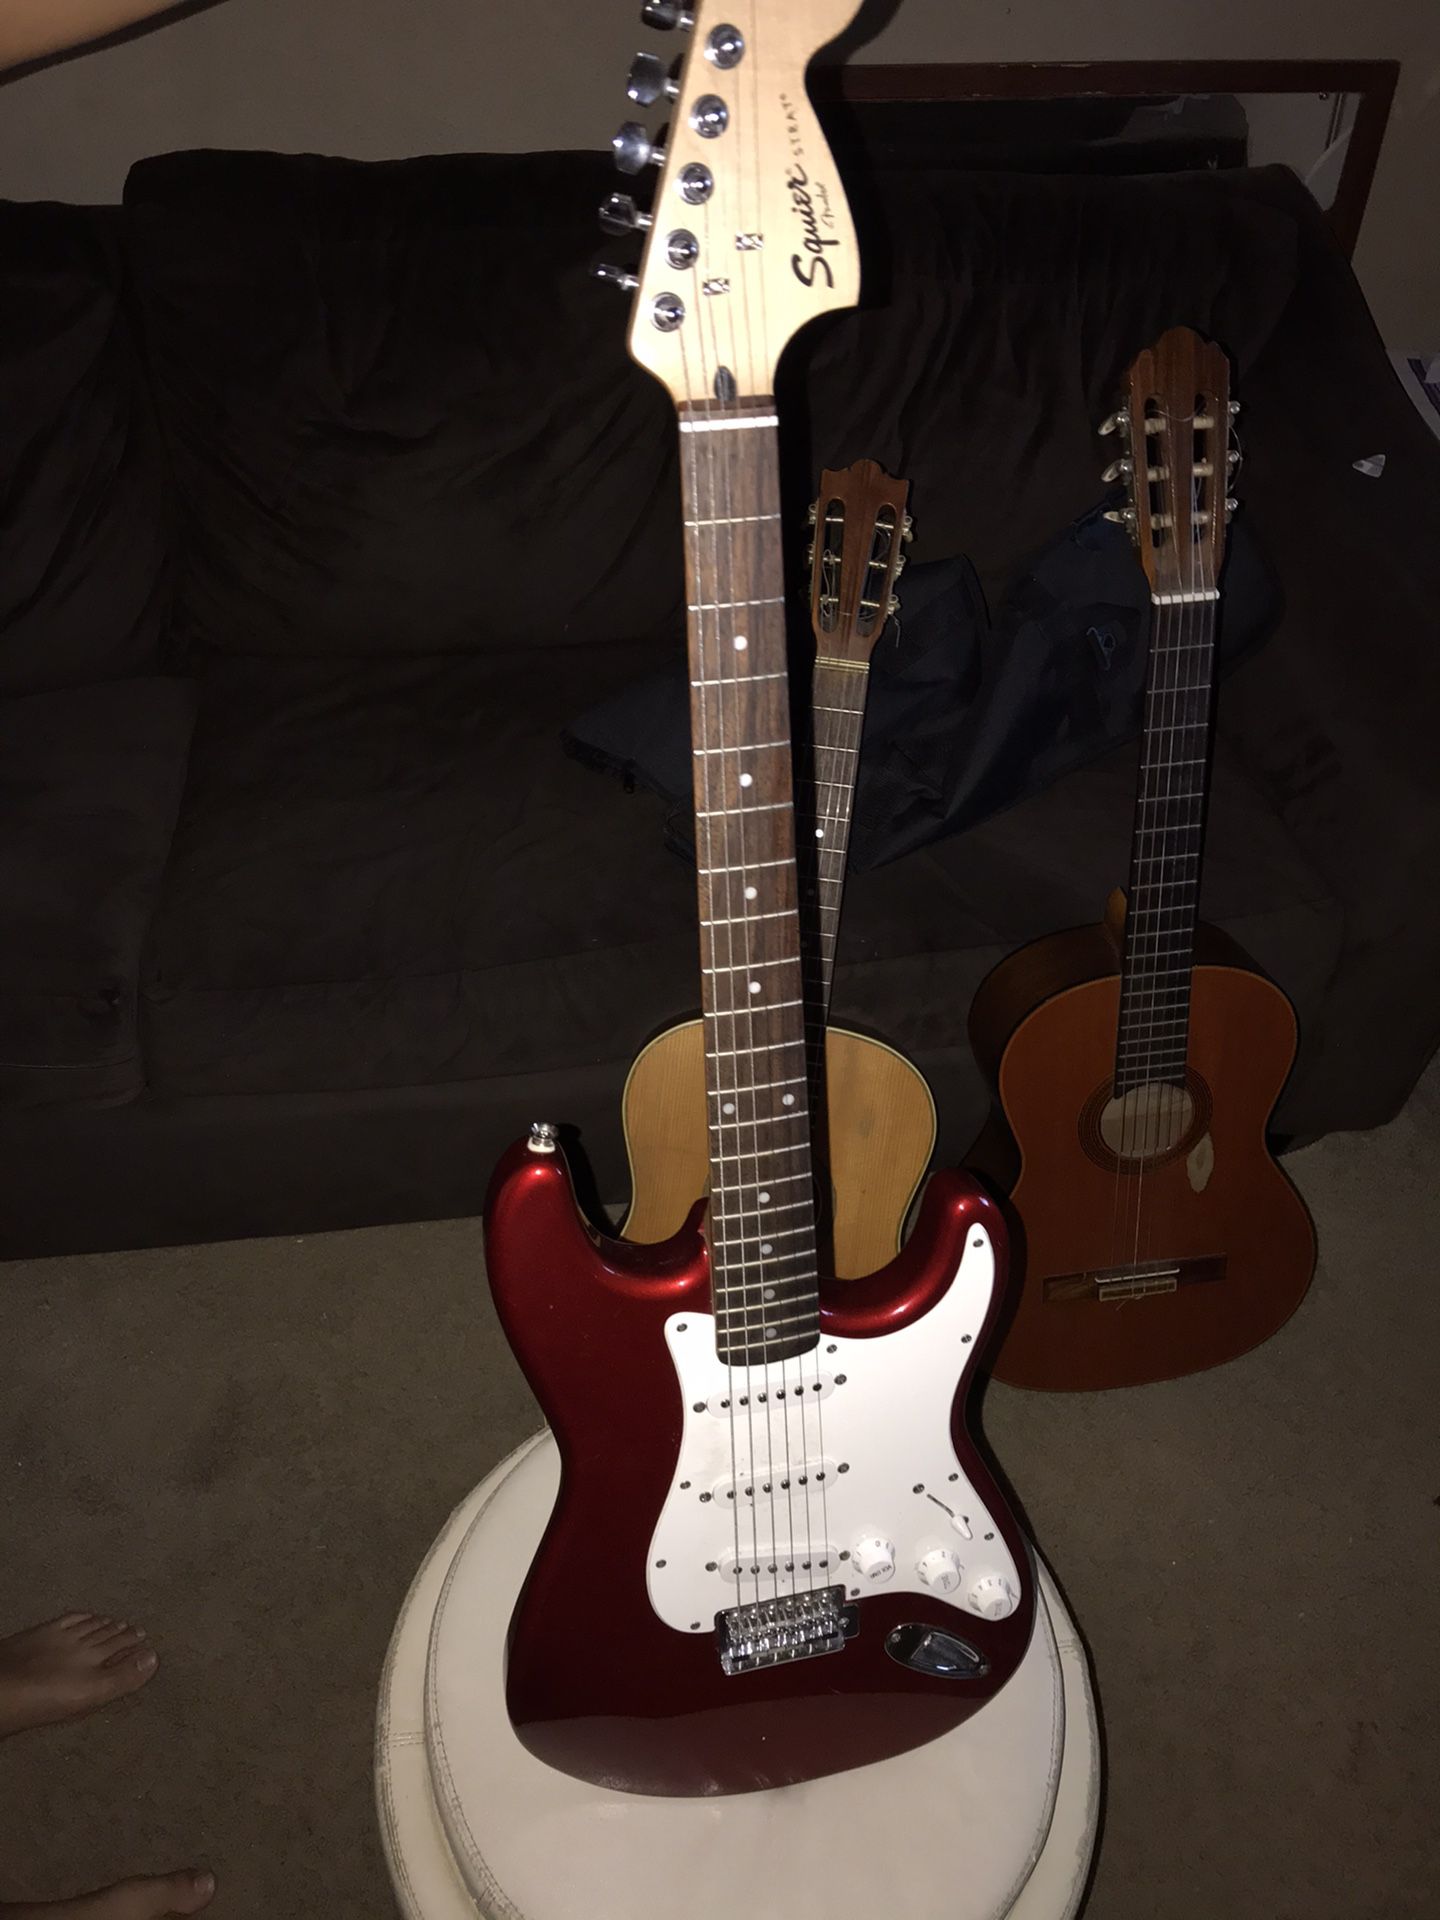 Squier Electric Guitar, Epiphone amp, Fender Guitar bag, and Cord